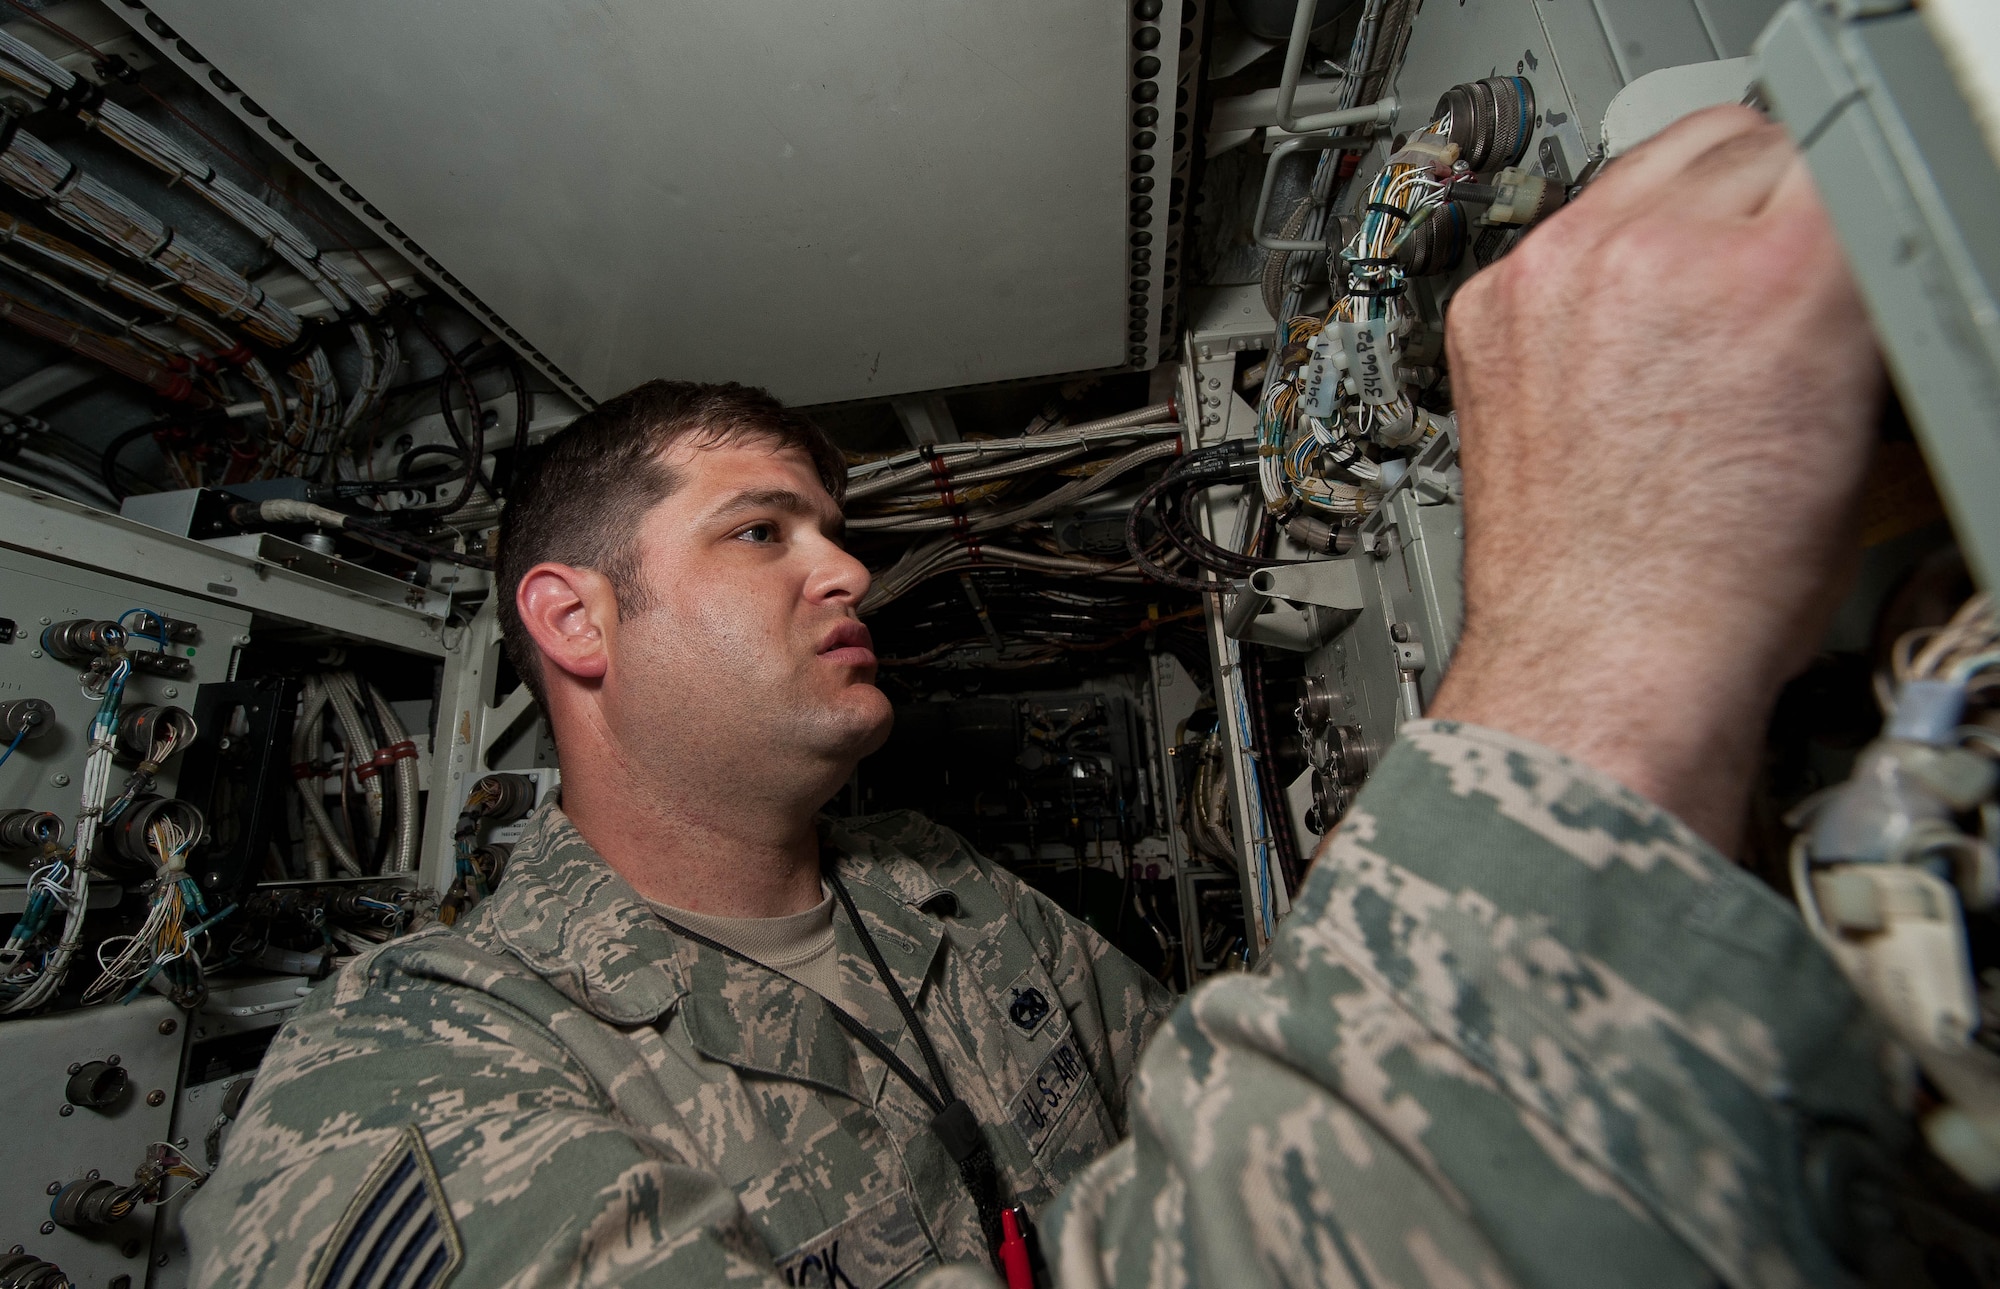 Staff Sgt. Patrick Gesick, 28th Aircraft Maintenance Squadron instrument flight controls lead technician, inspects the central integrated test system in a B-1 bomber during routine maintenance at Ellsworth Air Force Base, S.D., May 15, 2013. The 28th AMXS is the largest squadron in the 28th Bomb Wing, with more than 700 Airmen supporting Ellsworth’s combat coded B-1 bombers. (U.S. Air Force photo by Airman 1st Class Zachary Hada/Released)